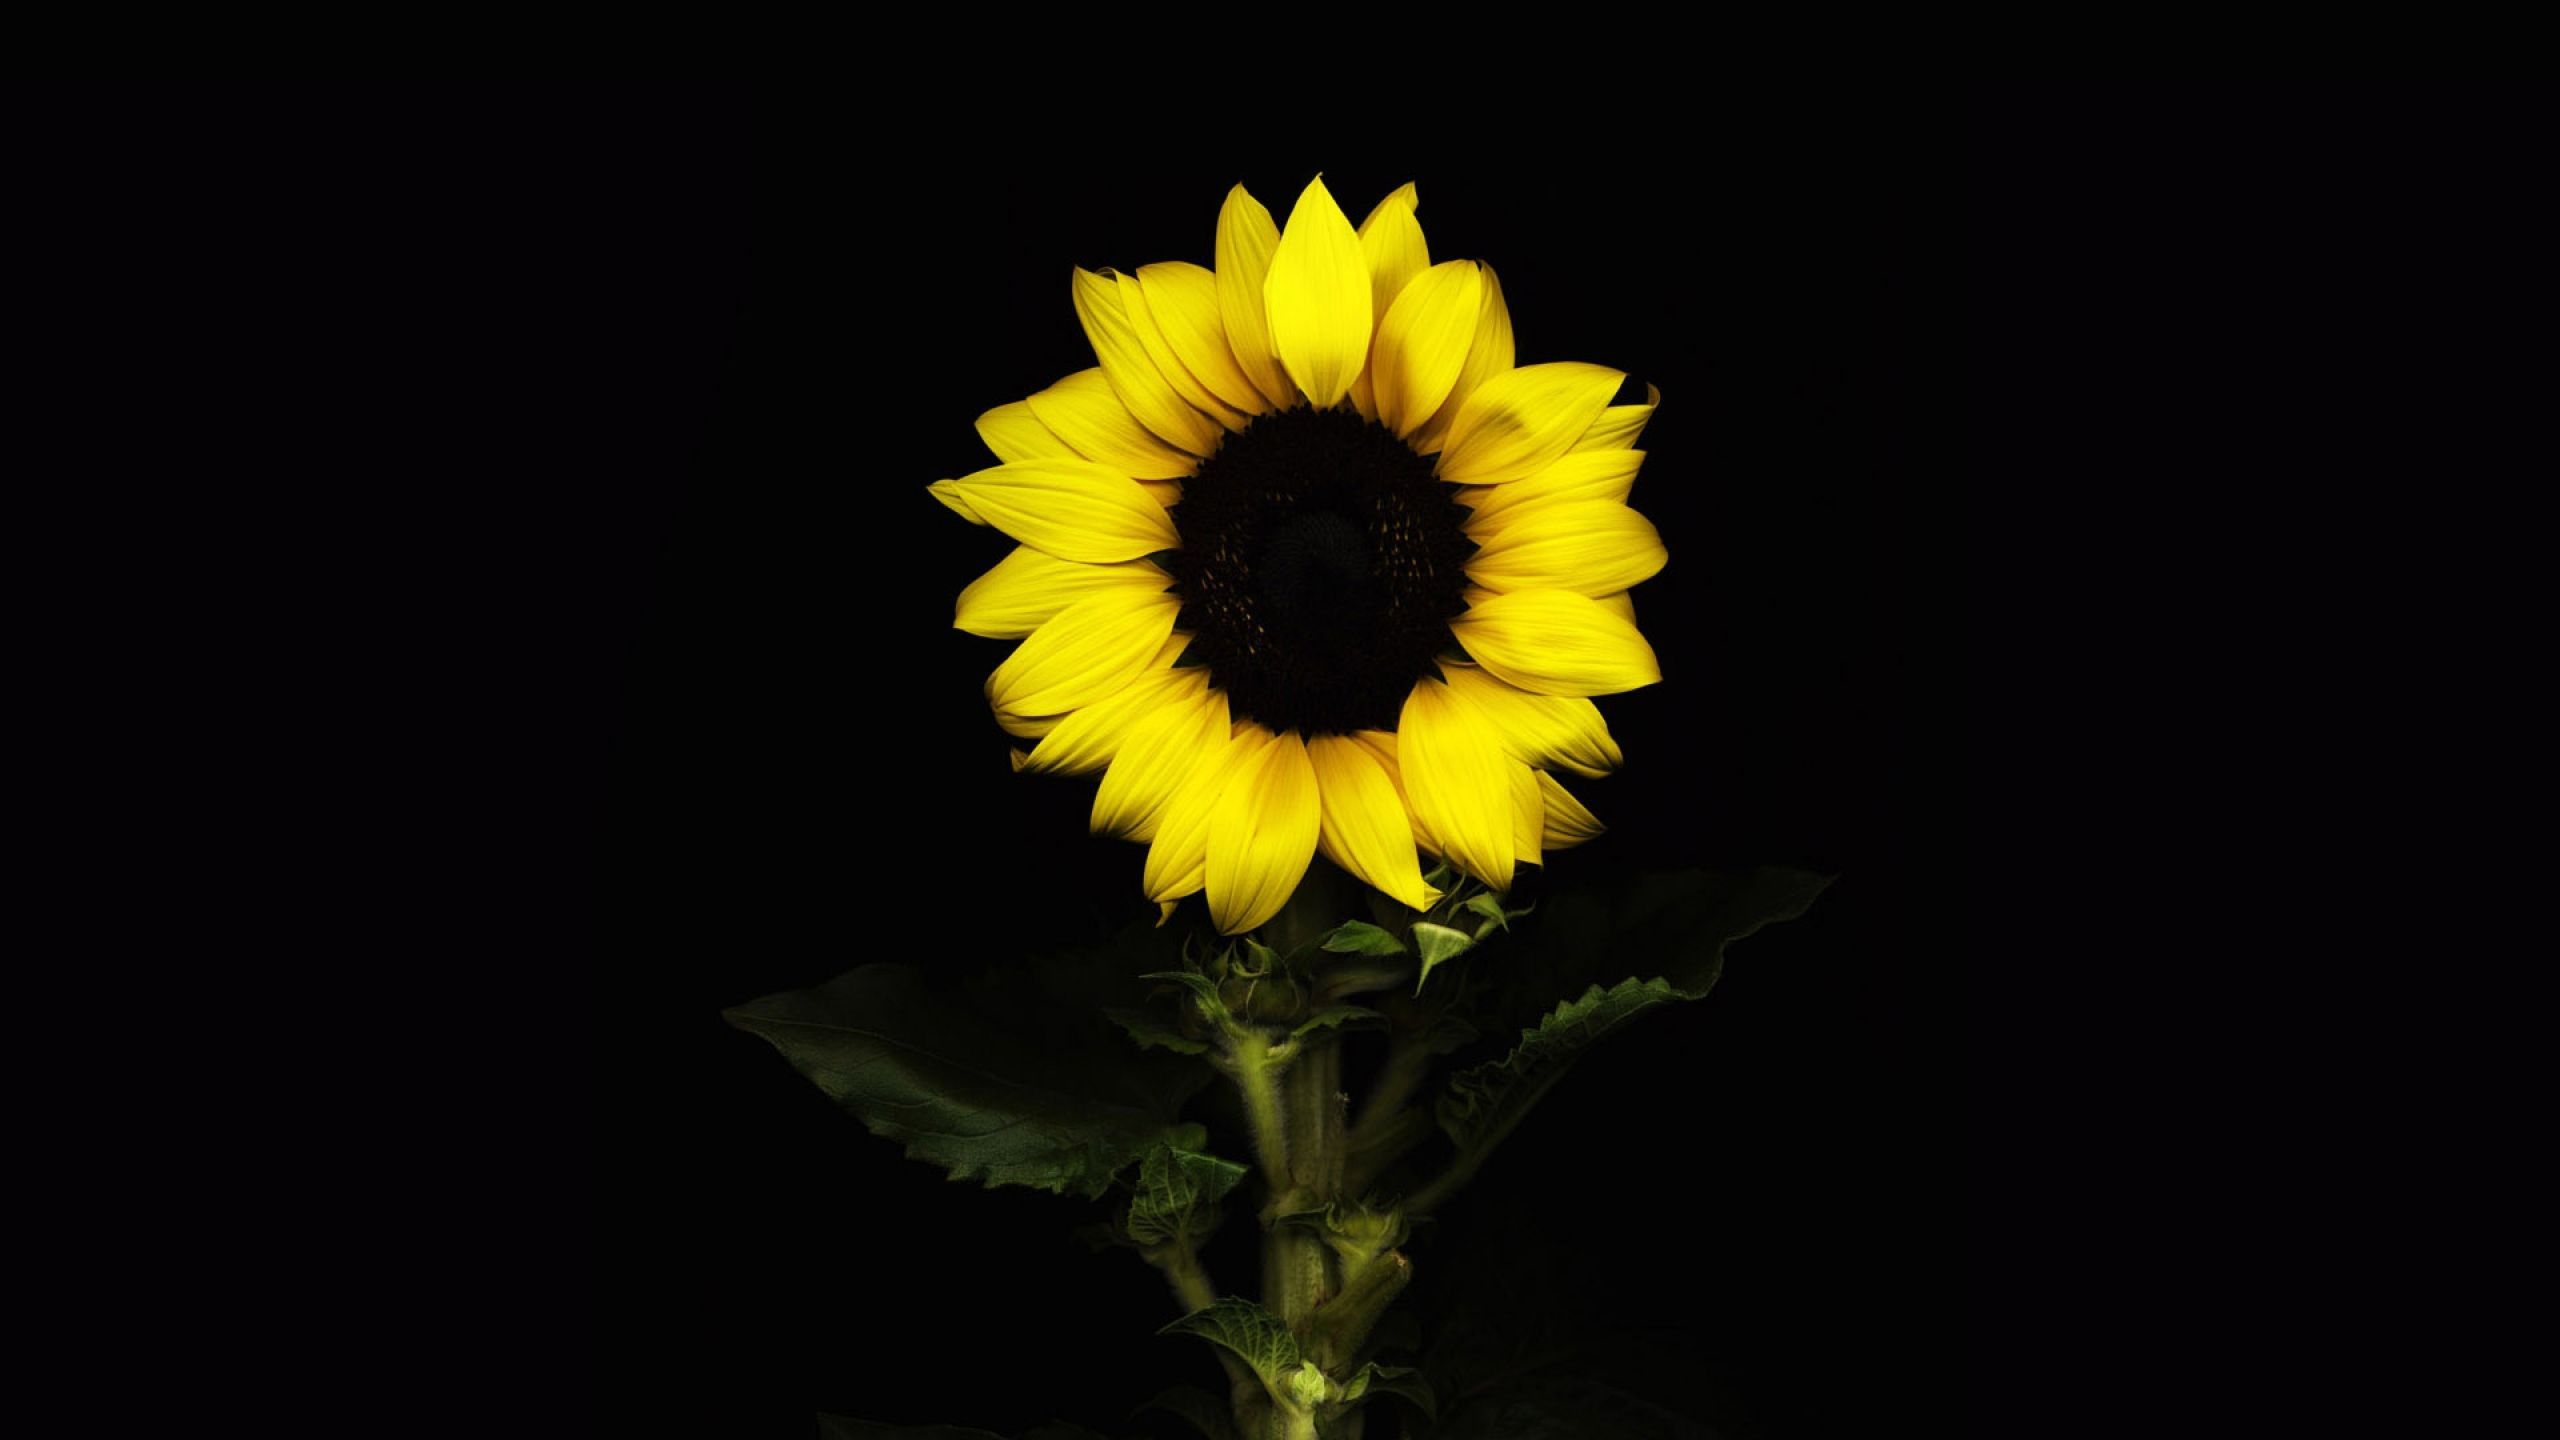 Download Wallpaper 2560x1440 Sunflower, Black background, With ...